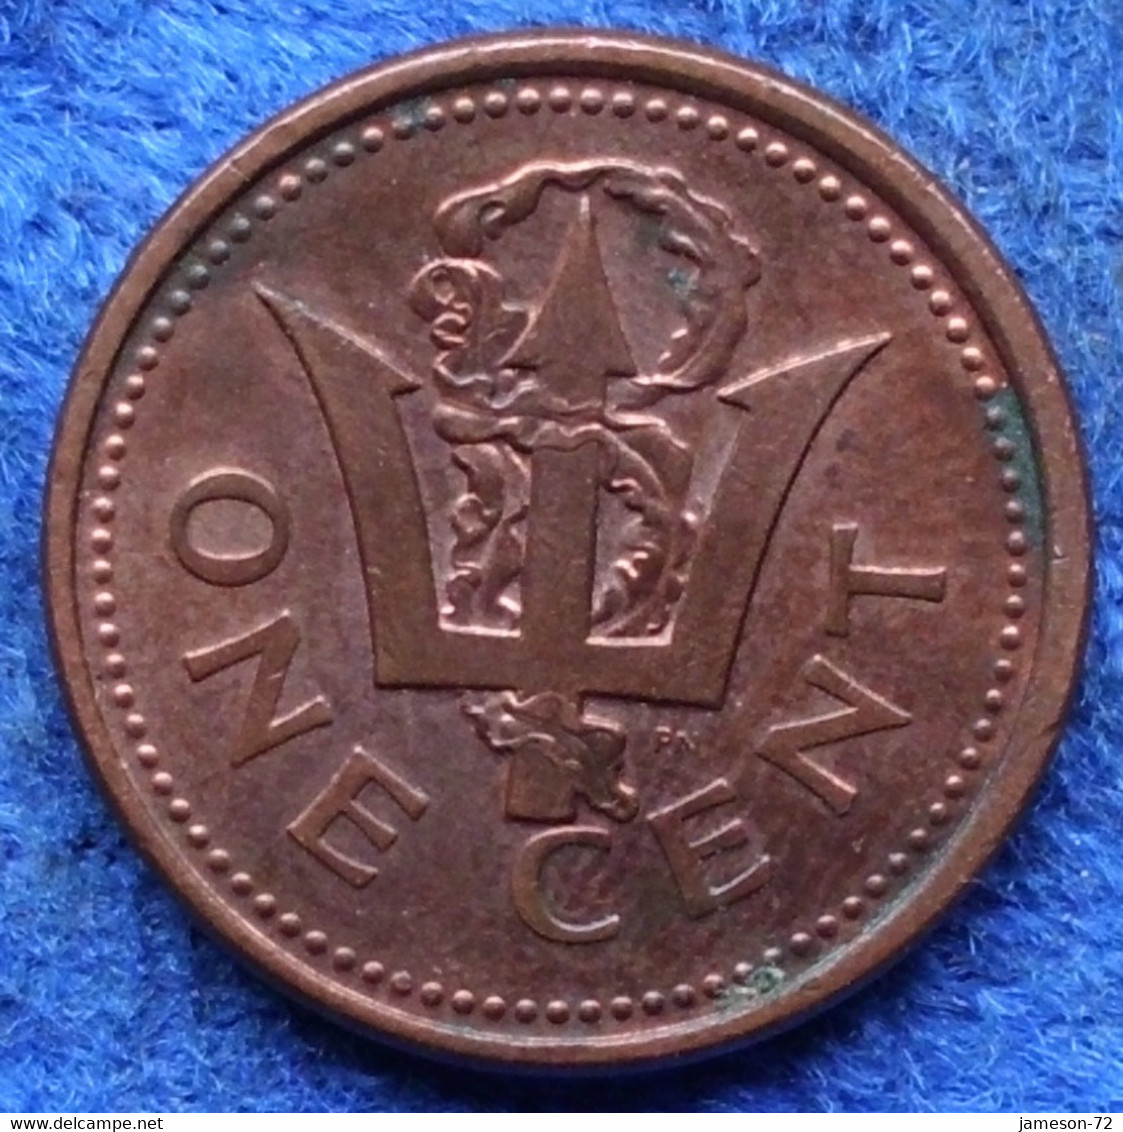 BARBADOS - 1 Cent 2005 KM#10a Commonwealth Independent (1966) - Edelweiss Coins - Barbados